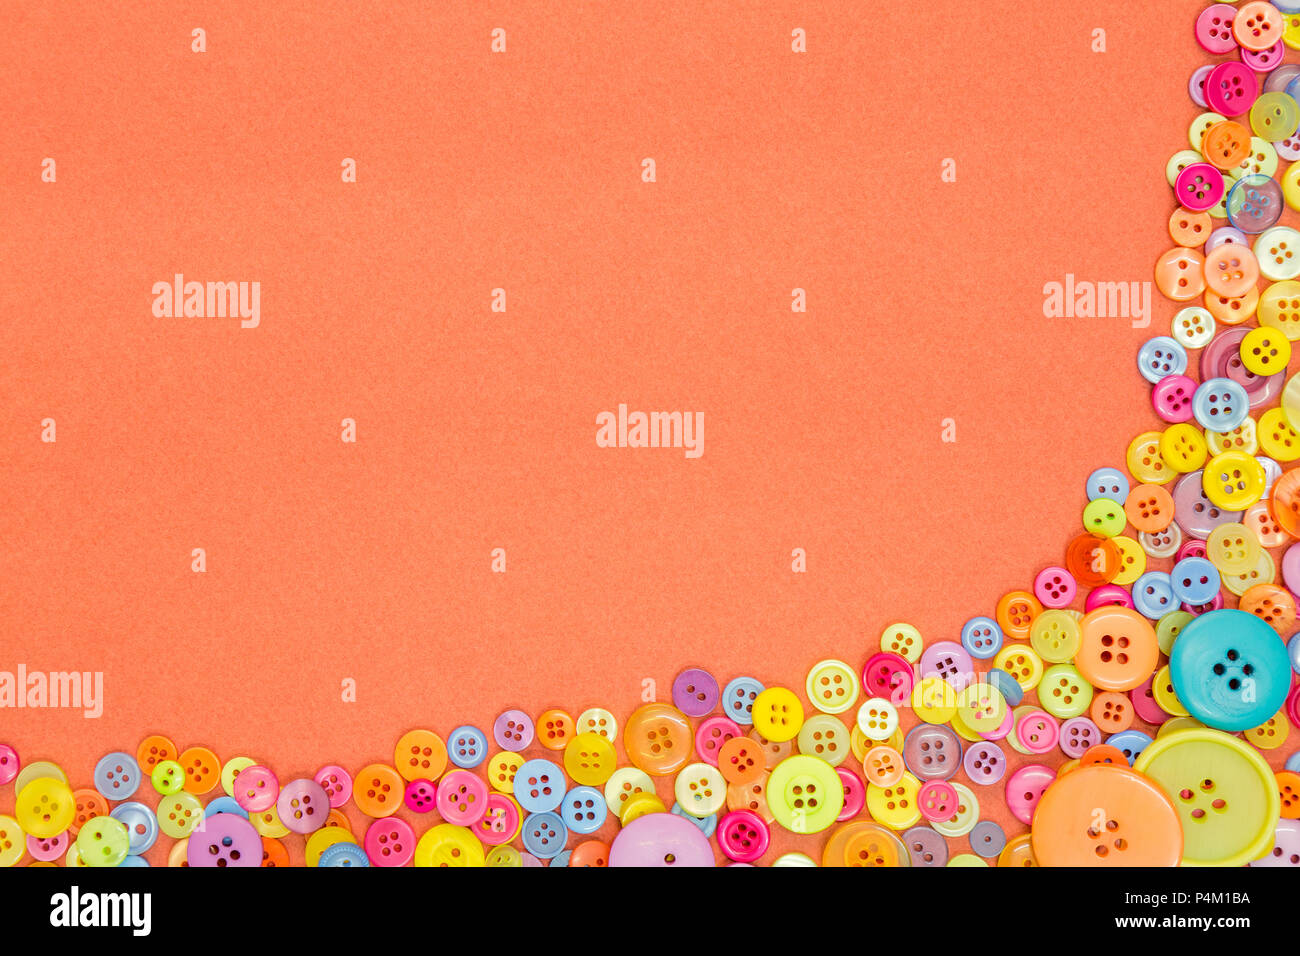 Lots of colourful buttons on an orange textured paper background with blank copy space. Stock Photo